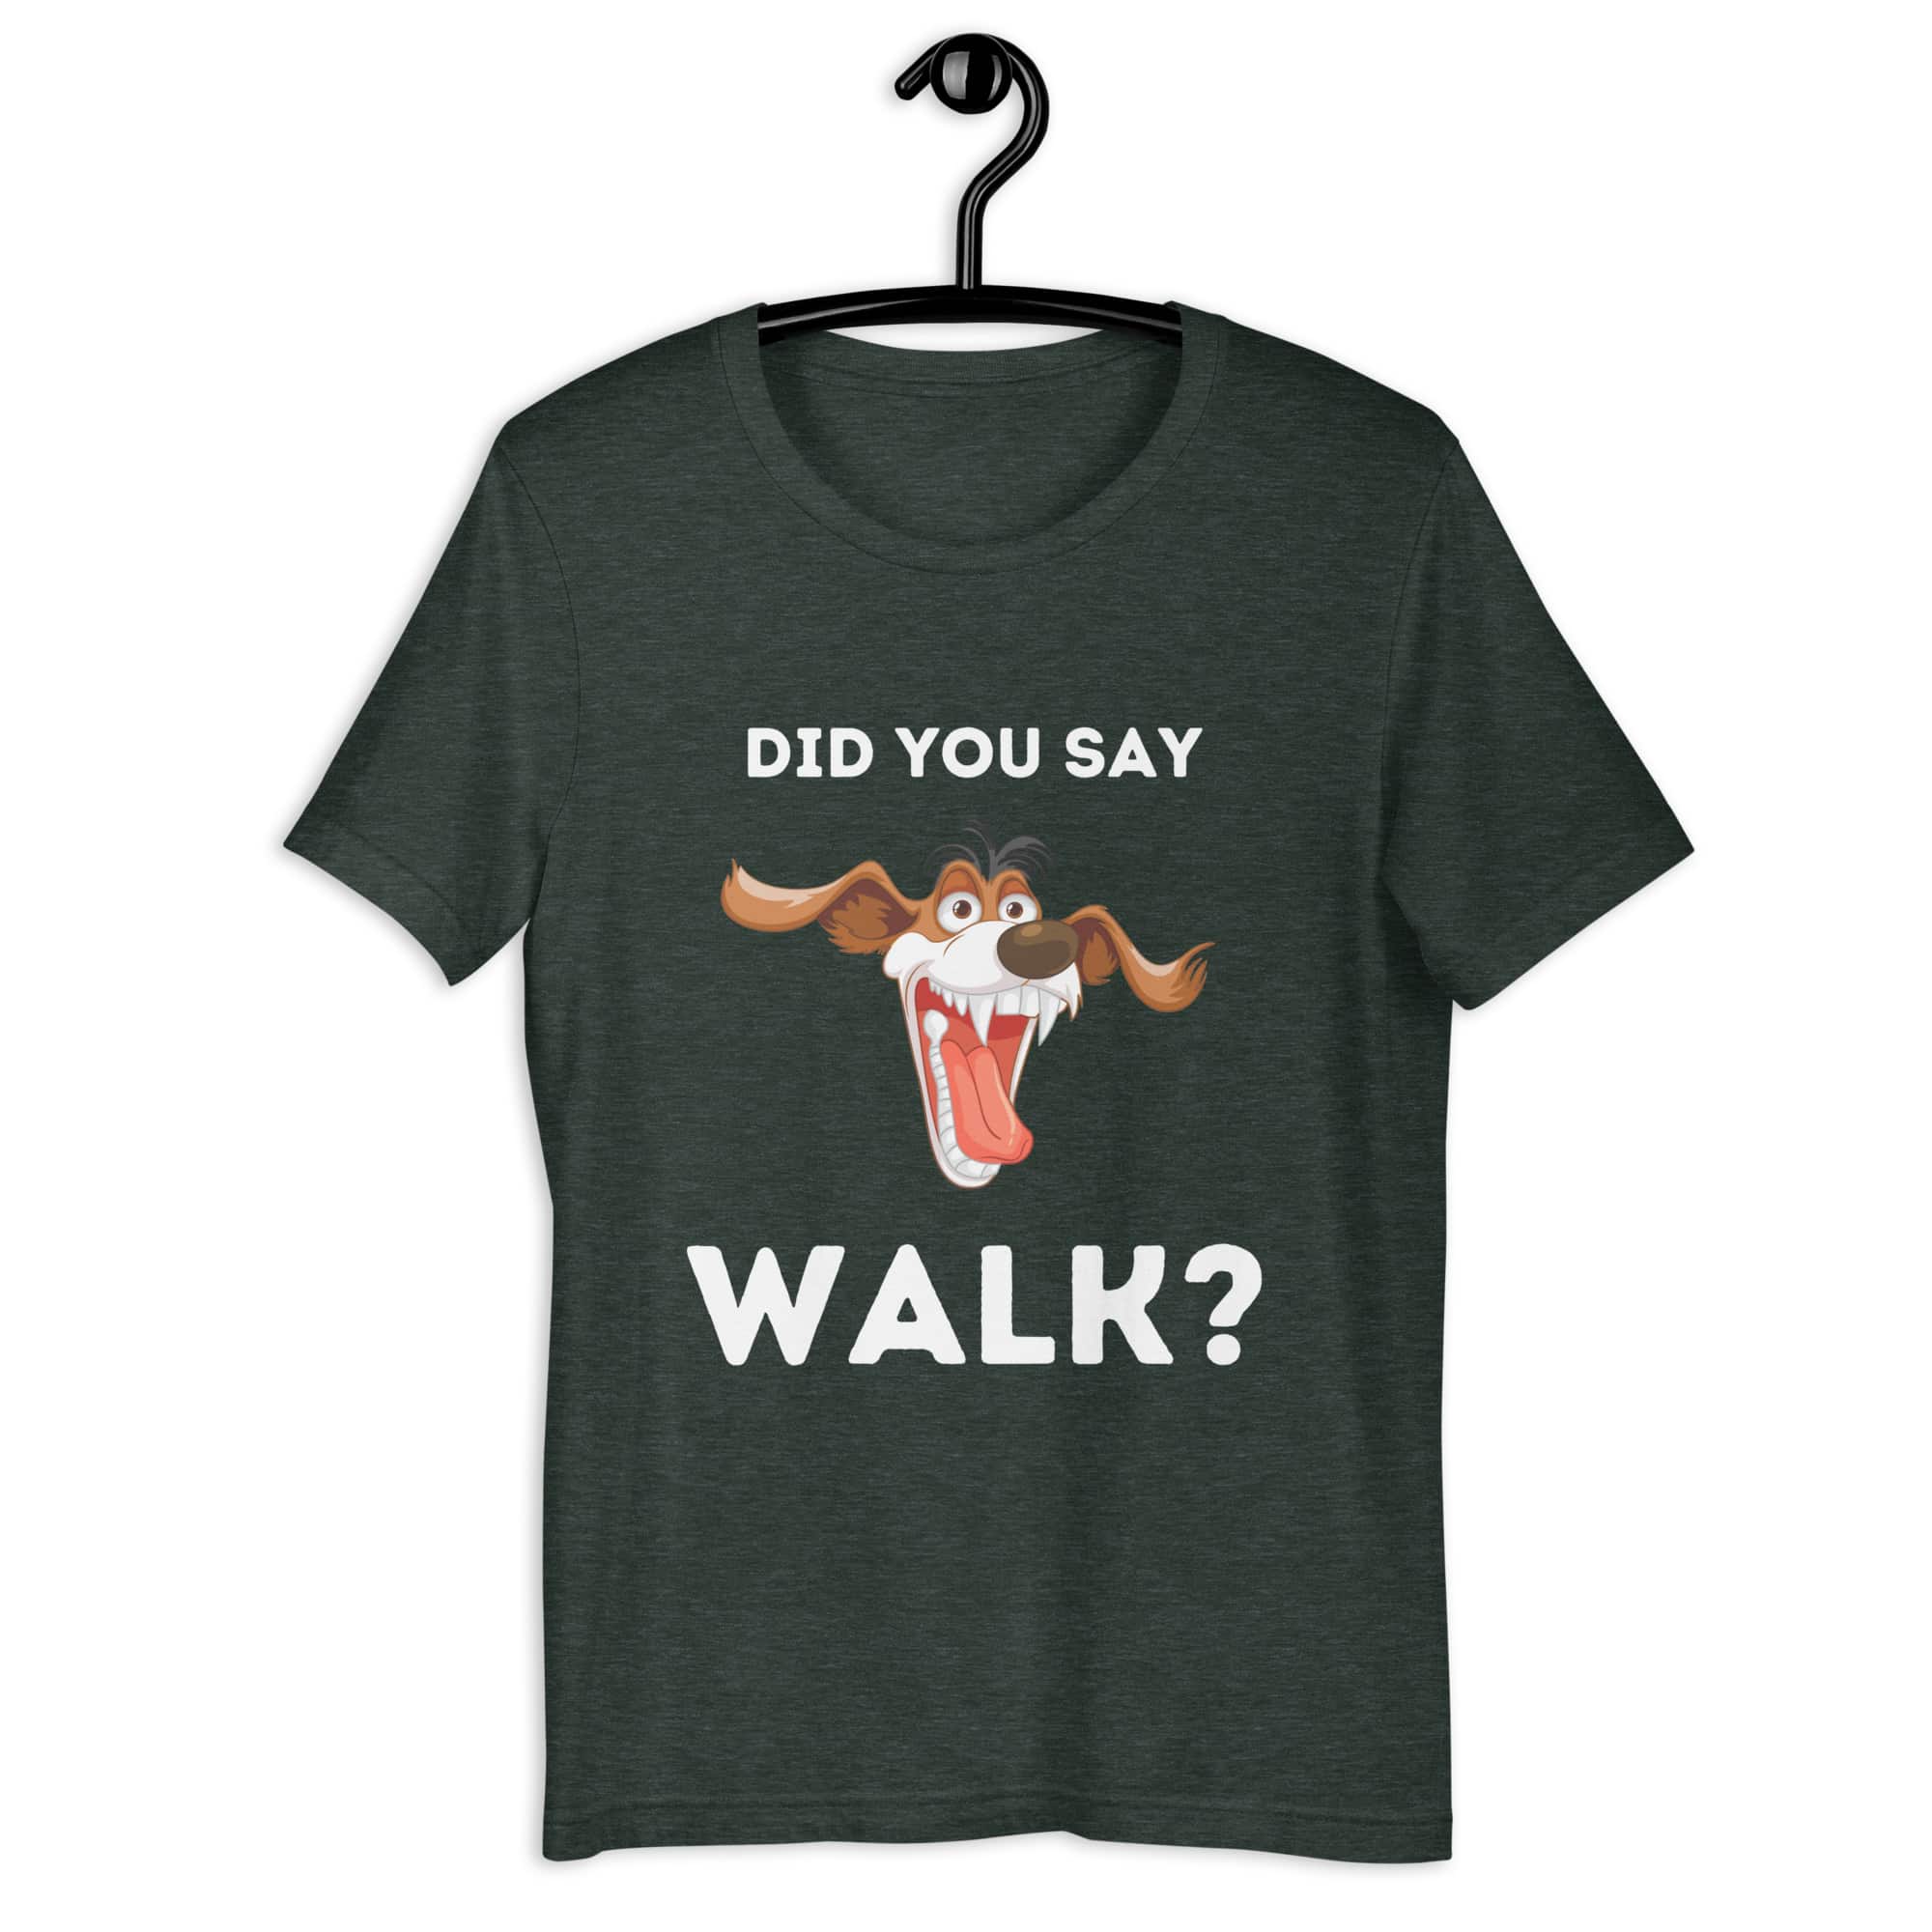 The "Funny 'Did You Say Walk?' Dog Unisex T-Shirt" captures the excitement dogs feel at the mention of a walk. Made from a comfortable, durable blend, it features a vibrant graphic that dog lovers will relate to. Available in various sizes and colors, it's perfect for casual wear, highlighting a universal moment in dog ownership with humor and style. Heather Forest